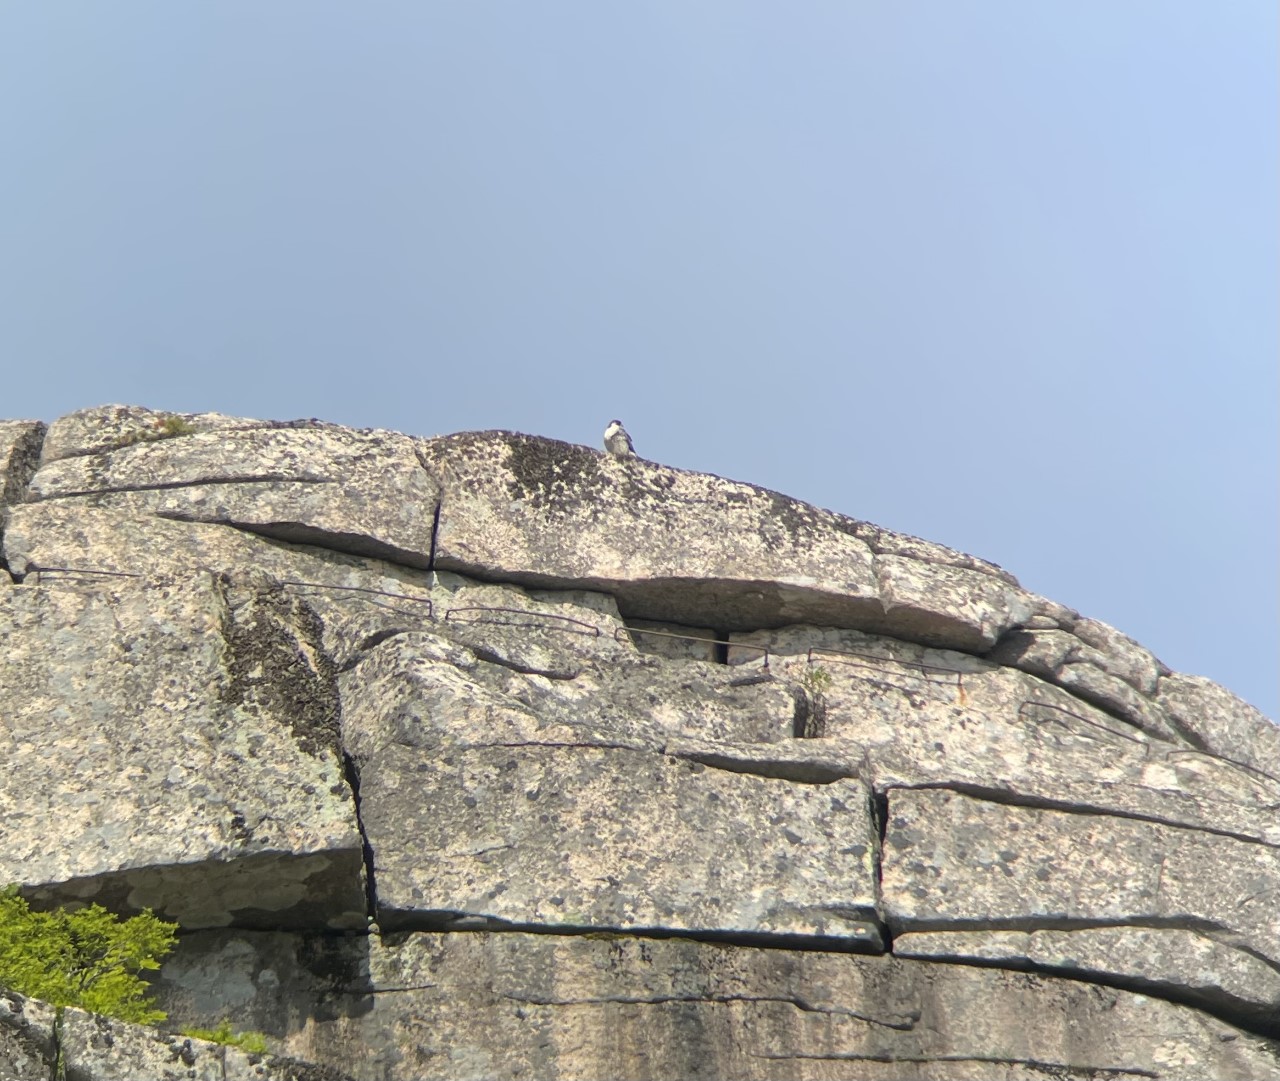 Raising Peregrine Falcon Chicks is a Real Cliff-hanger